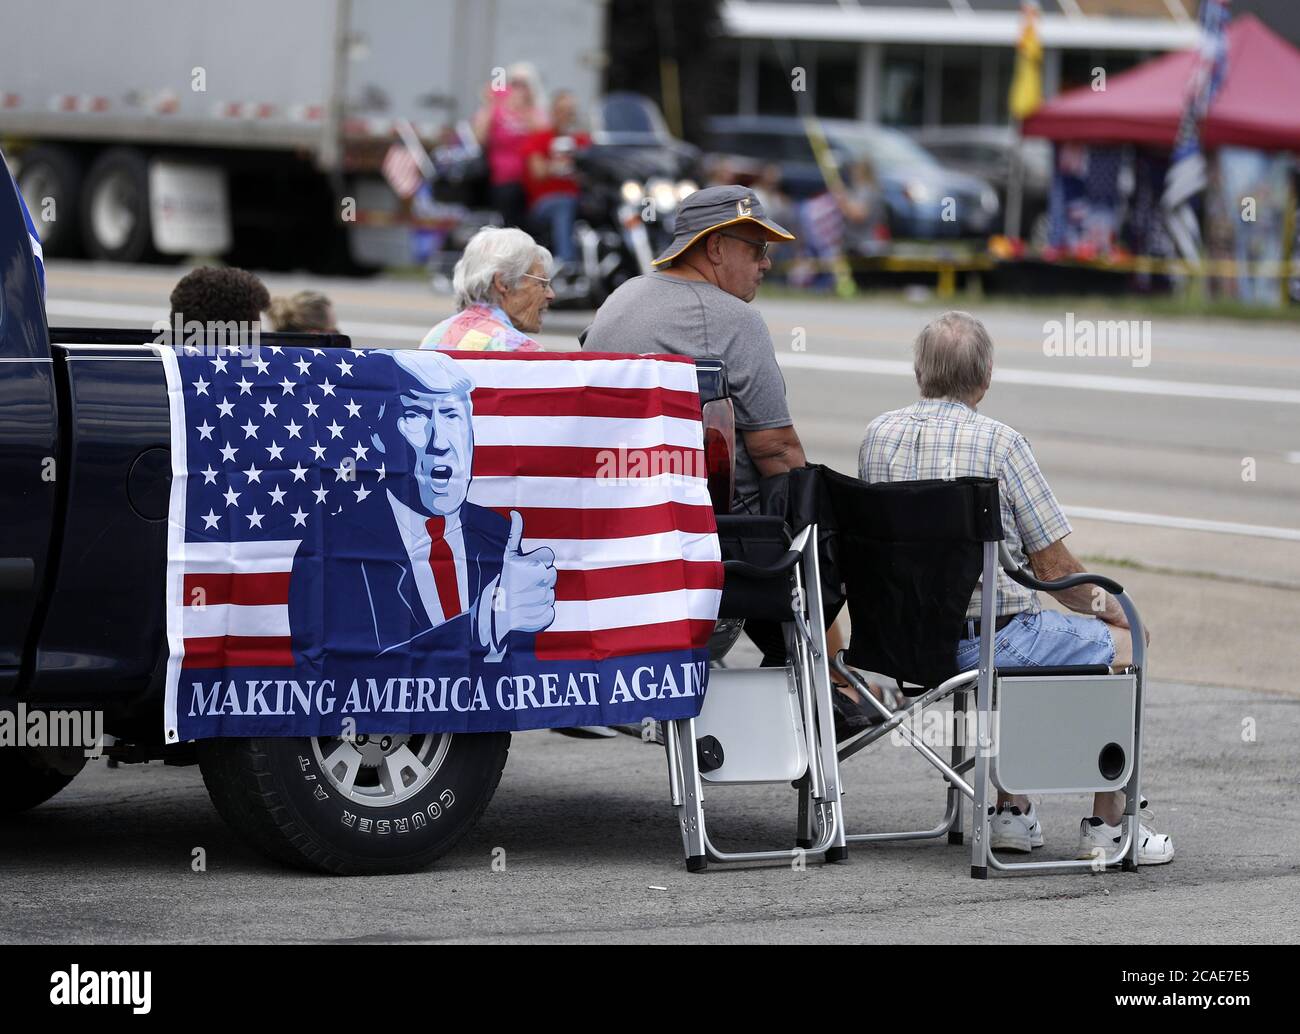 Clyde, United States. 06th Aug, 2020. President Donald Trump supporters line the streets prior to the Presidents arrival to give remarks on American manufacturing and the economy at the Whirlpool corporation manufacturing plant in Clyde, Ohio on Thursday, August 6, 2020. Photo by Aaron Josefczyk/UPI Credit: UPI/Alamy Live News Stock Photo